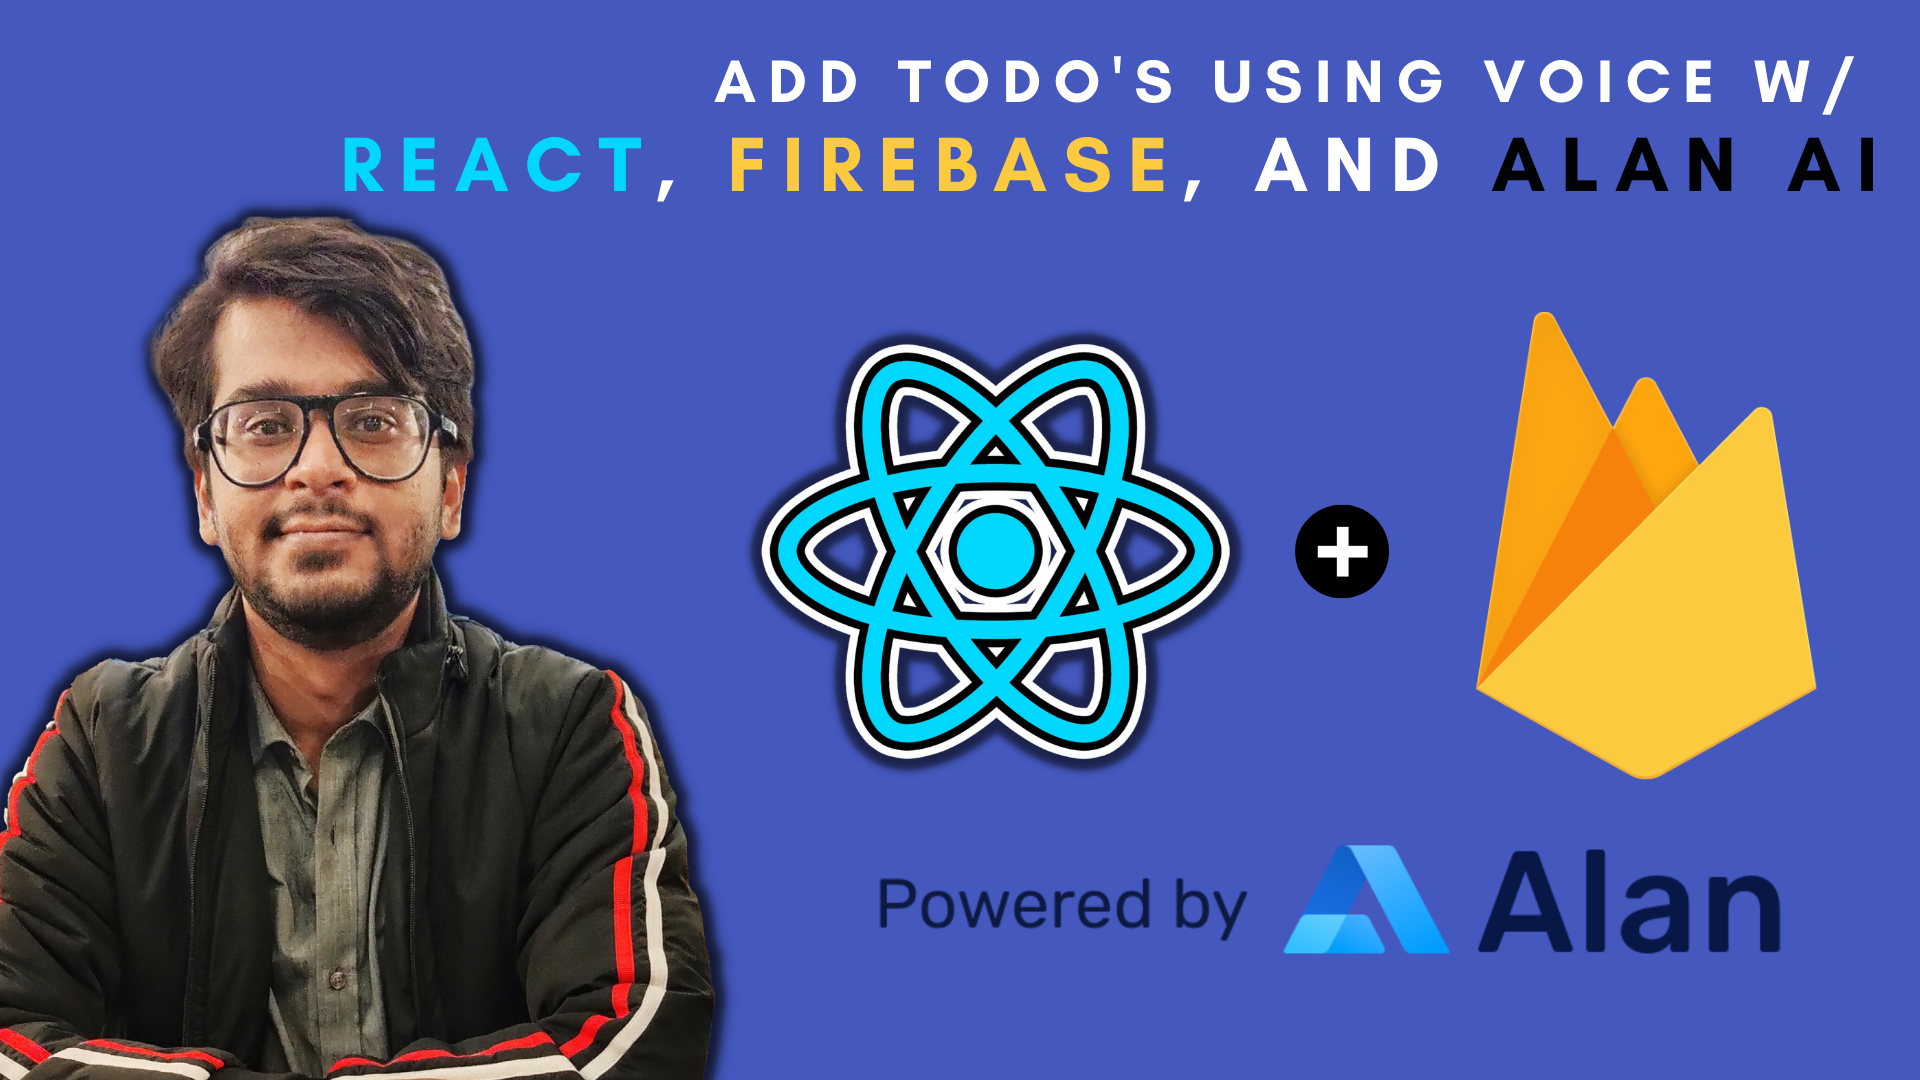 How to Build a Voice-Based Todo App using React, Firebase, and Alan AI